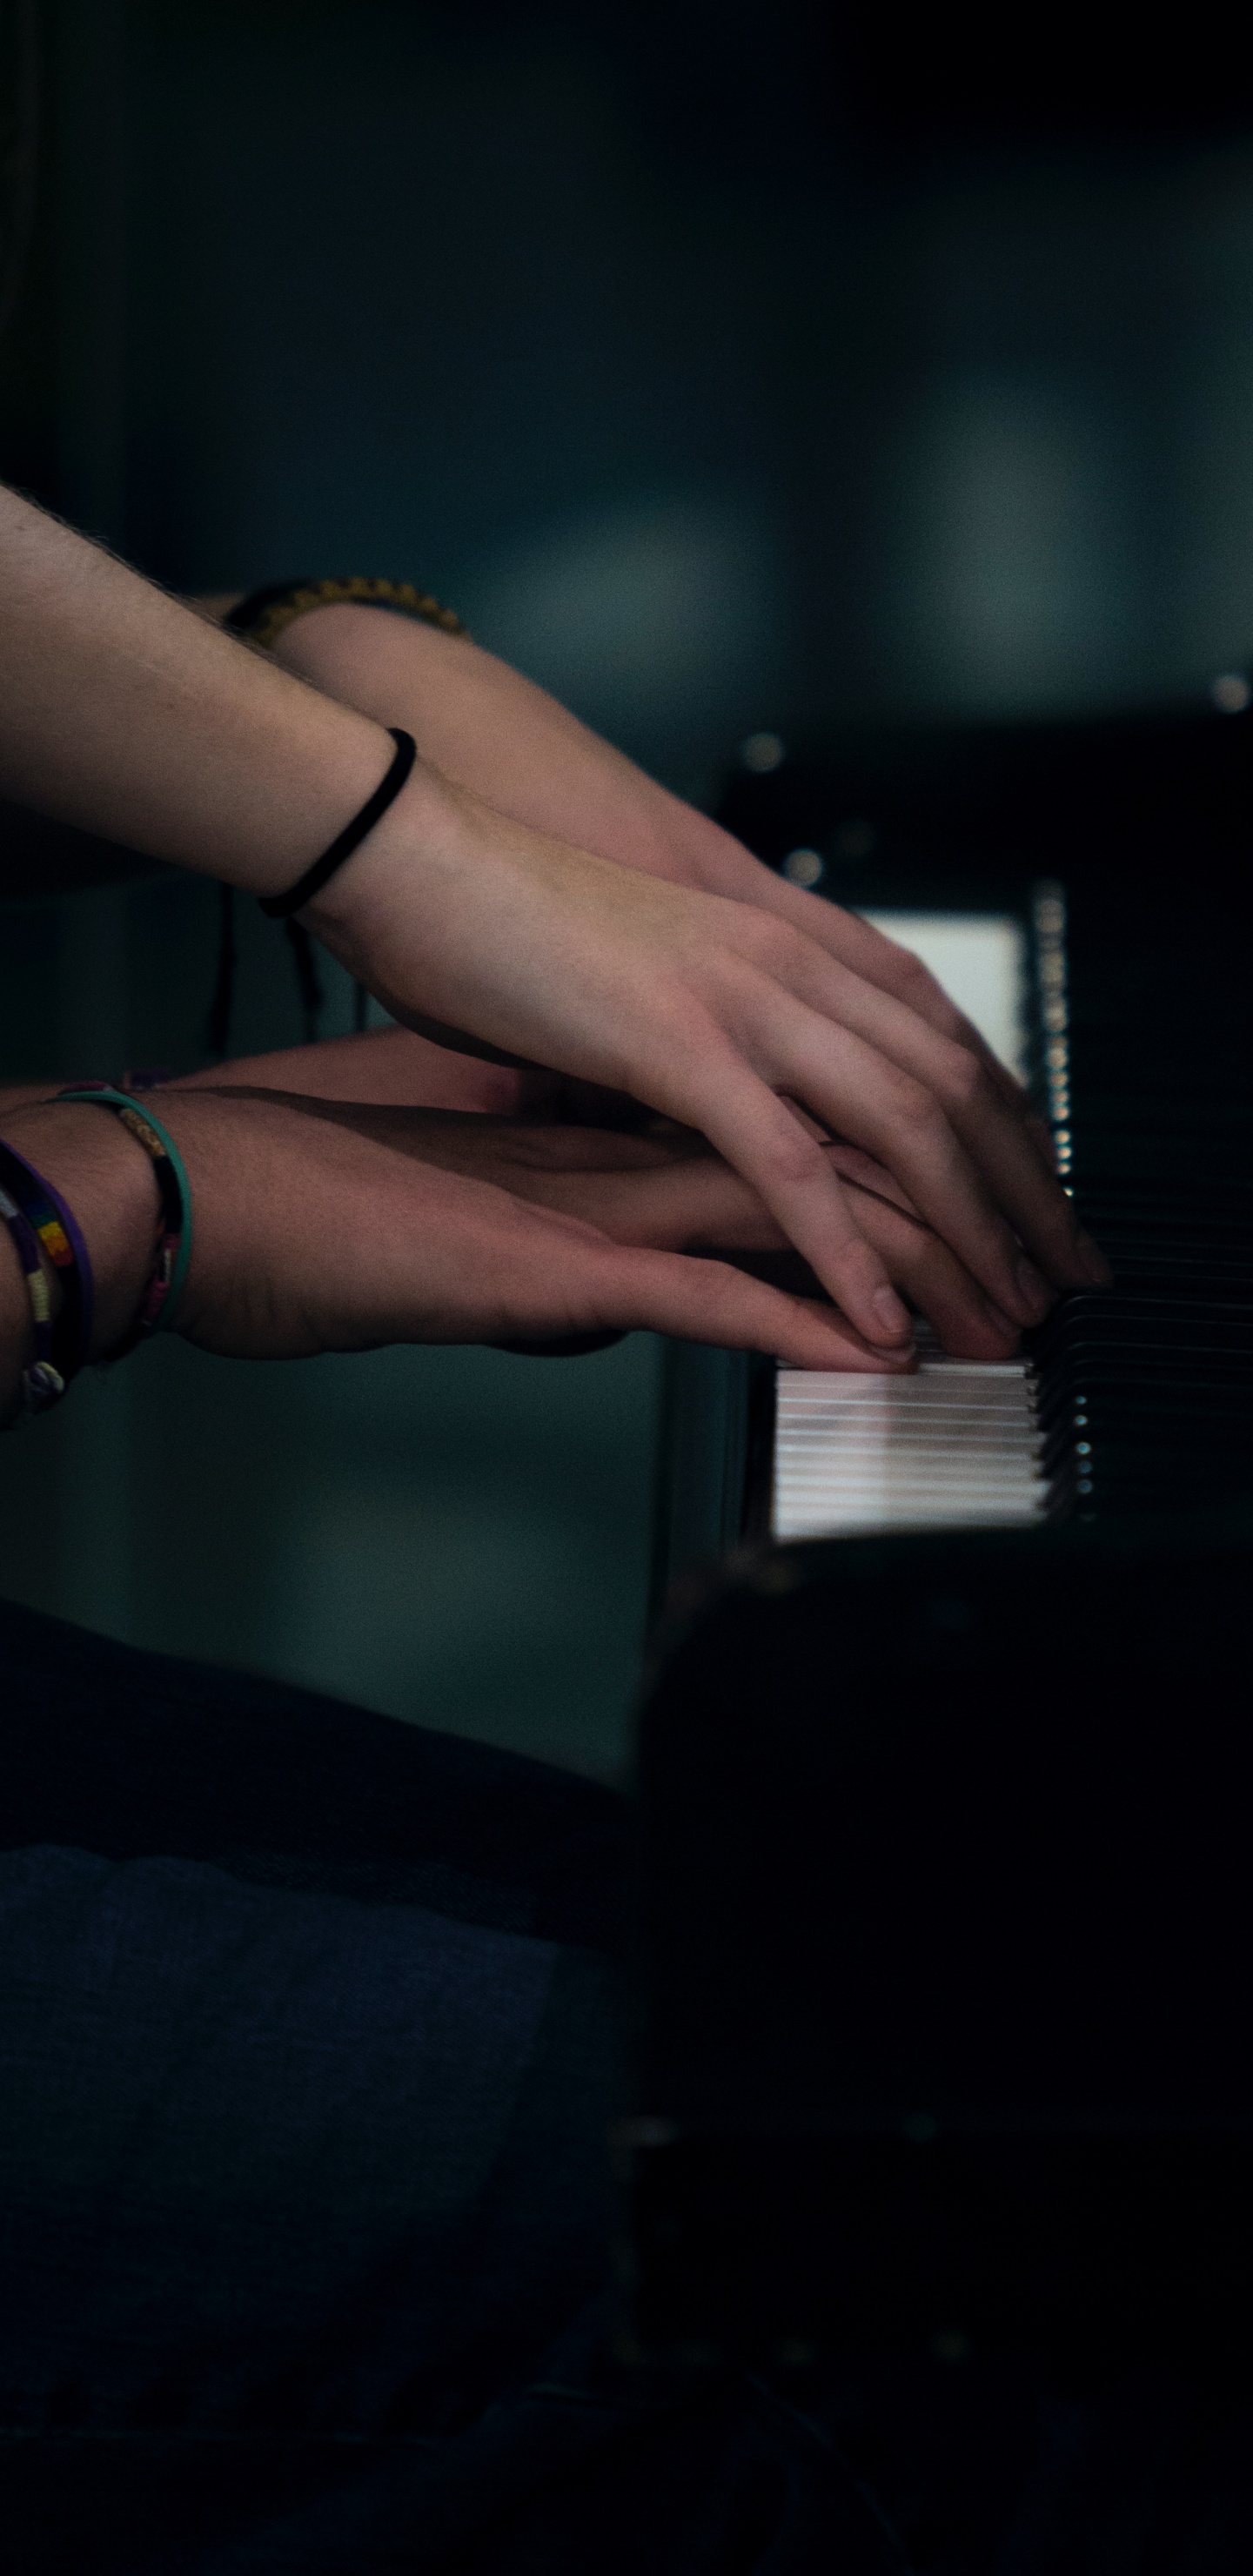 Piano, Pianist, Hand, Musician, Arm. Wallpaper in 1440x2960 Resolution